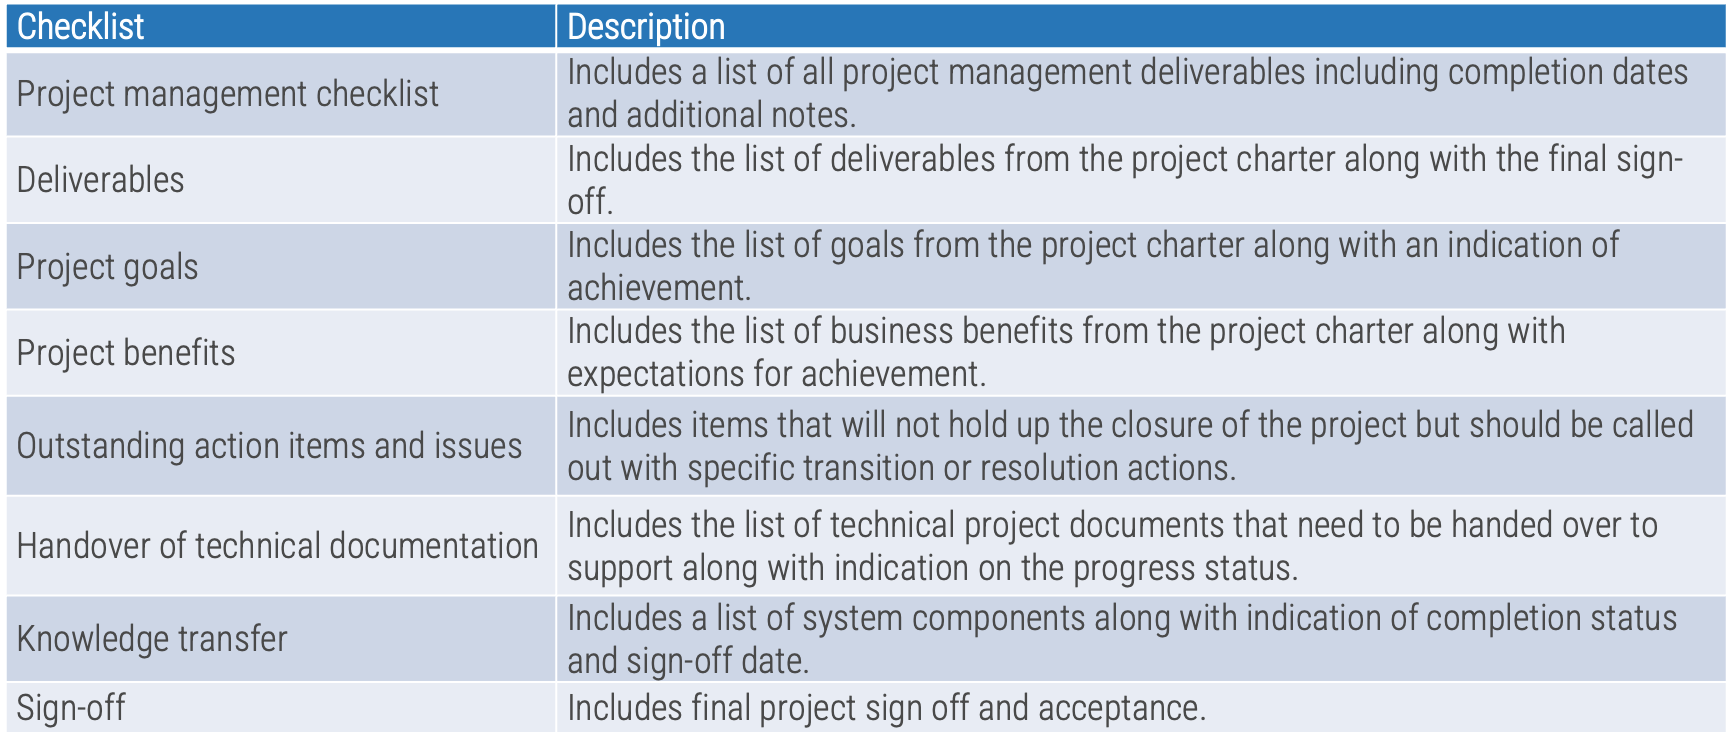 Project closure checklist. project management checklist, deliverables, goals, benefits, outstanding action items and issues, handover of technical documents, knowledge transfer, sign-off.